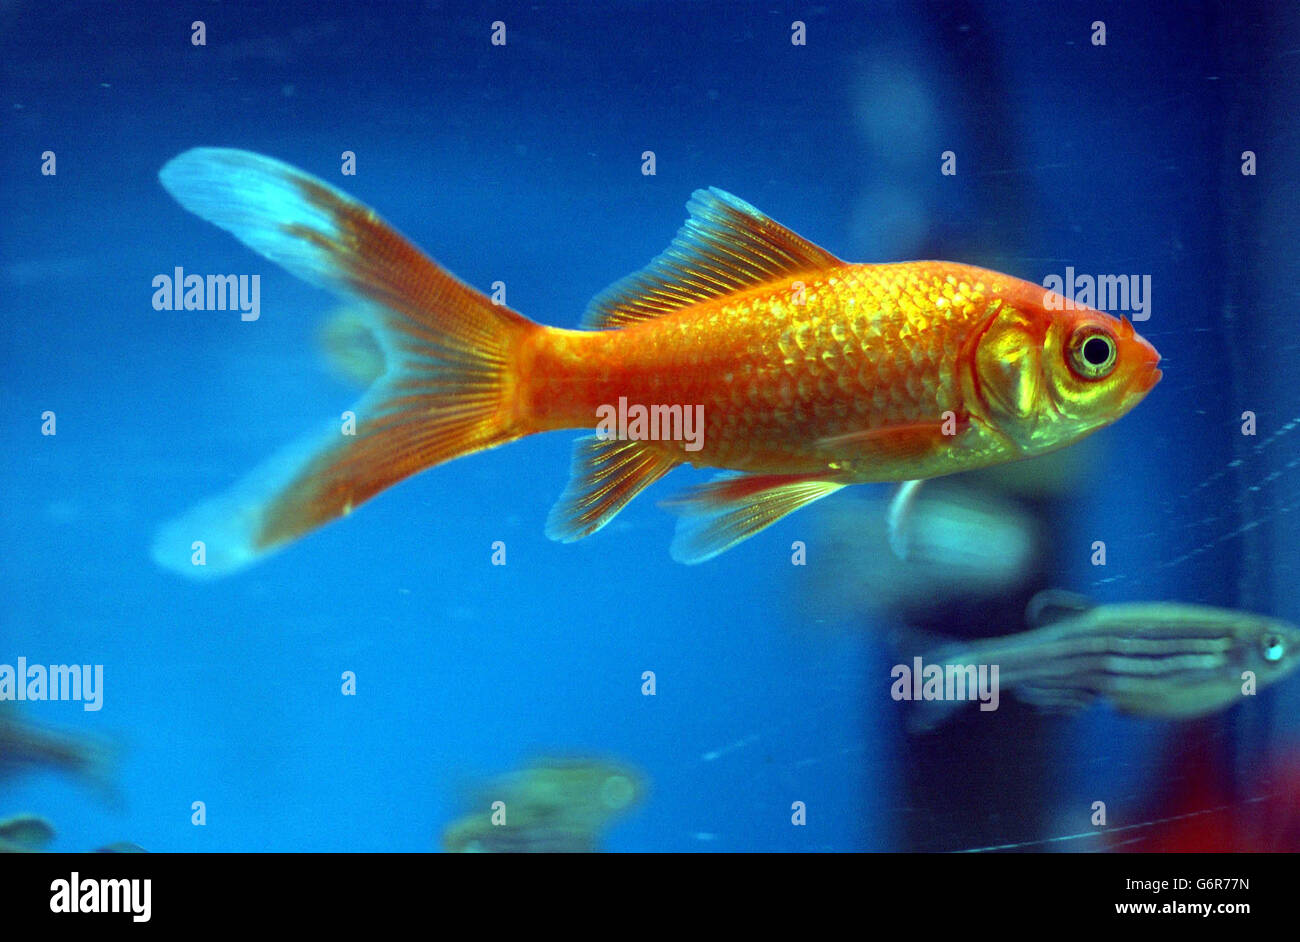 A Gold fish Stock Photo